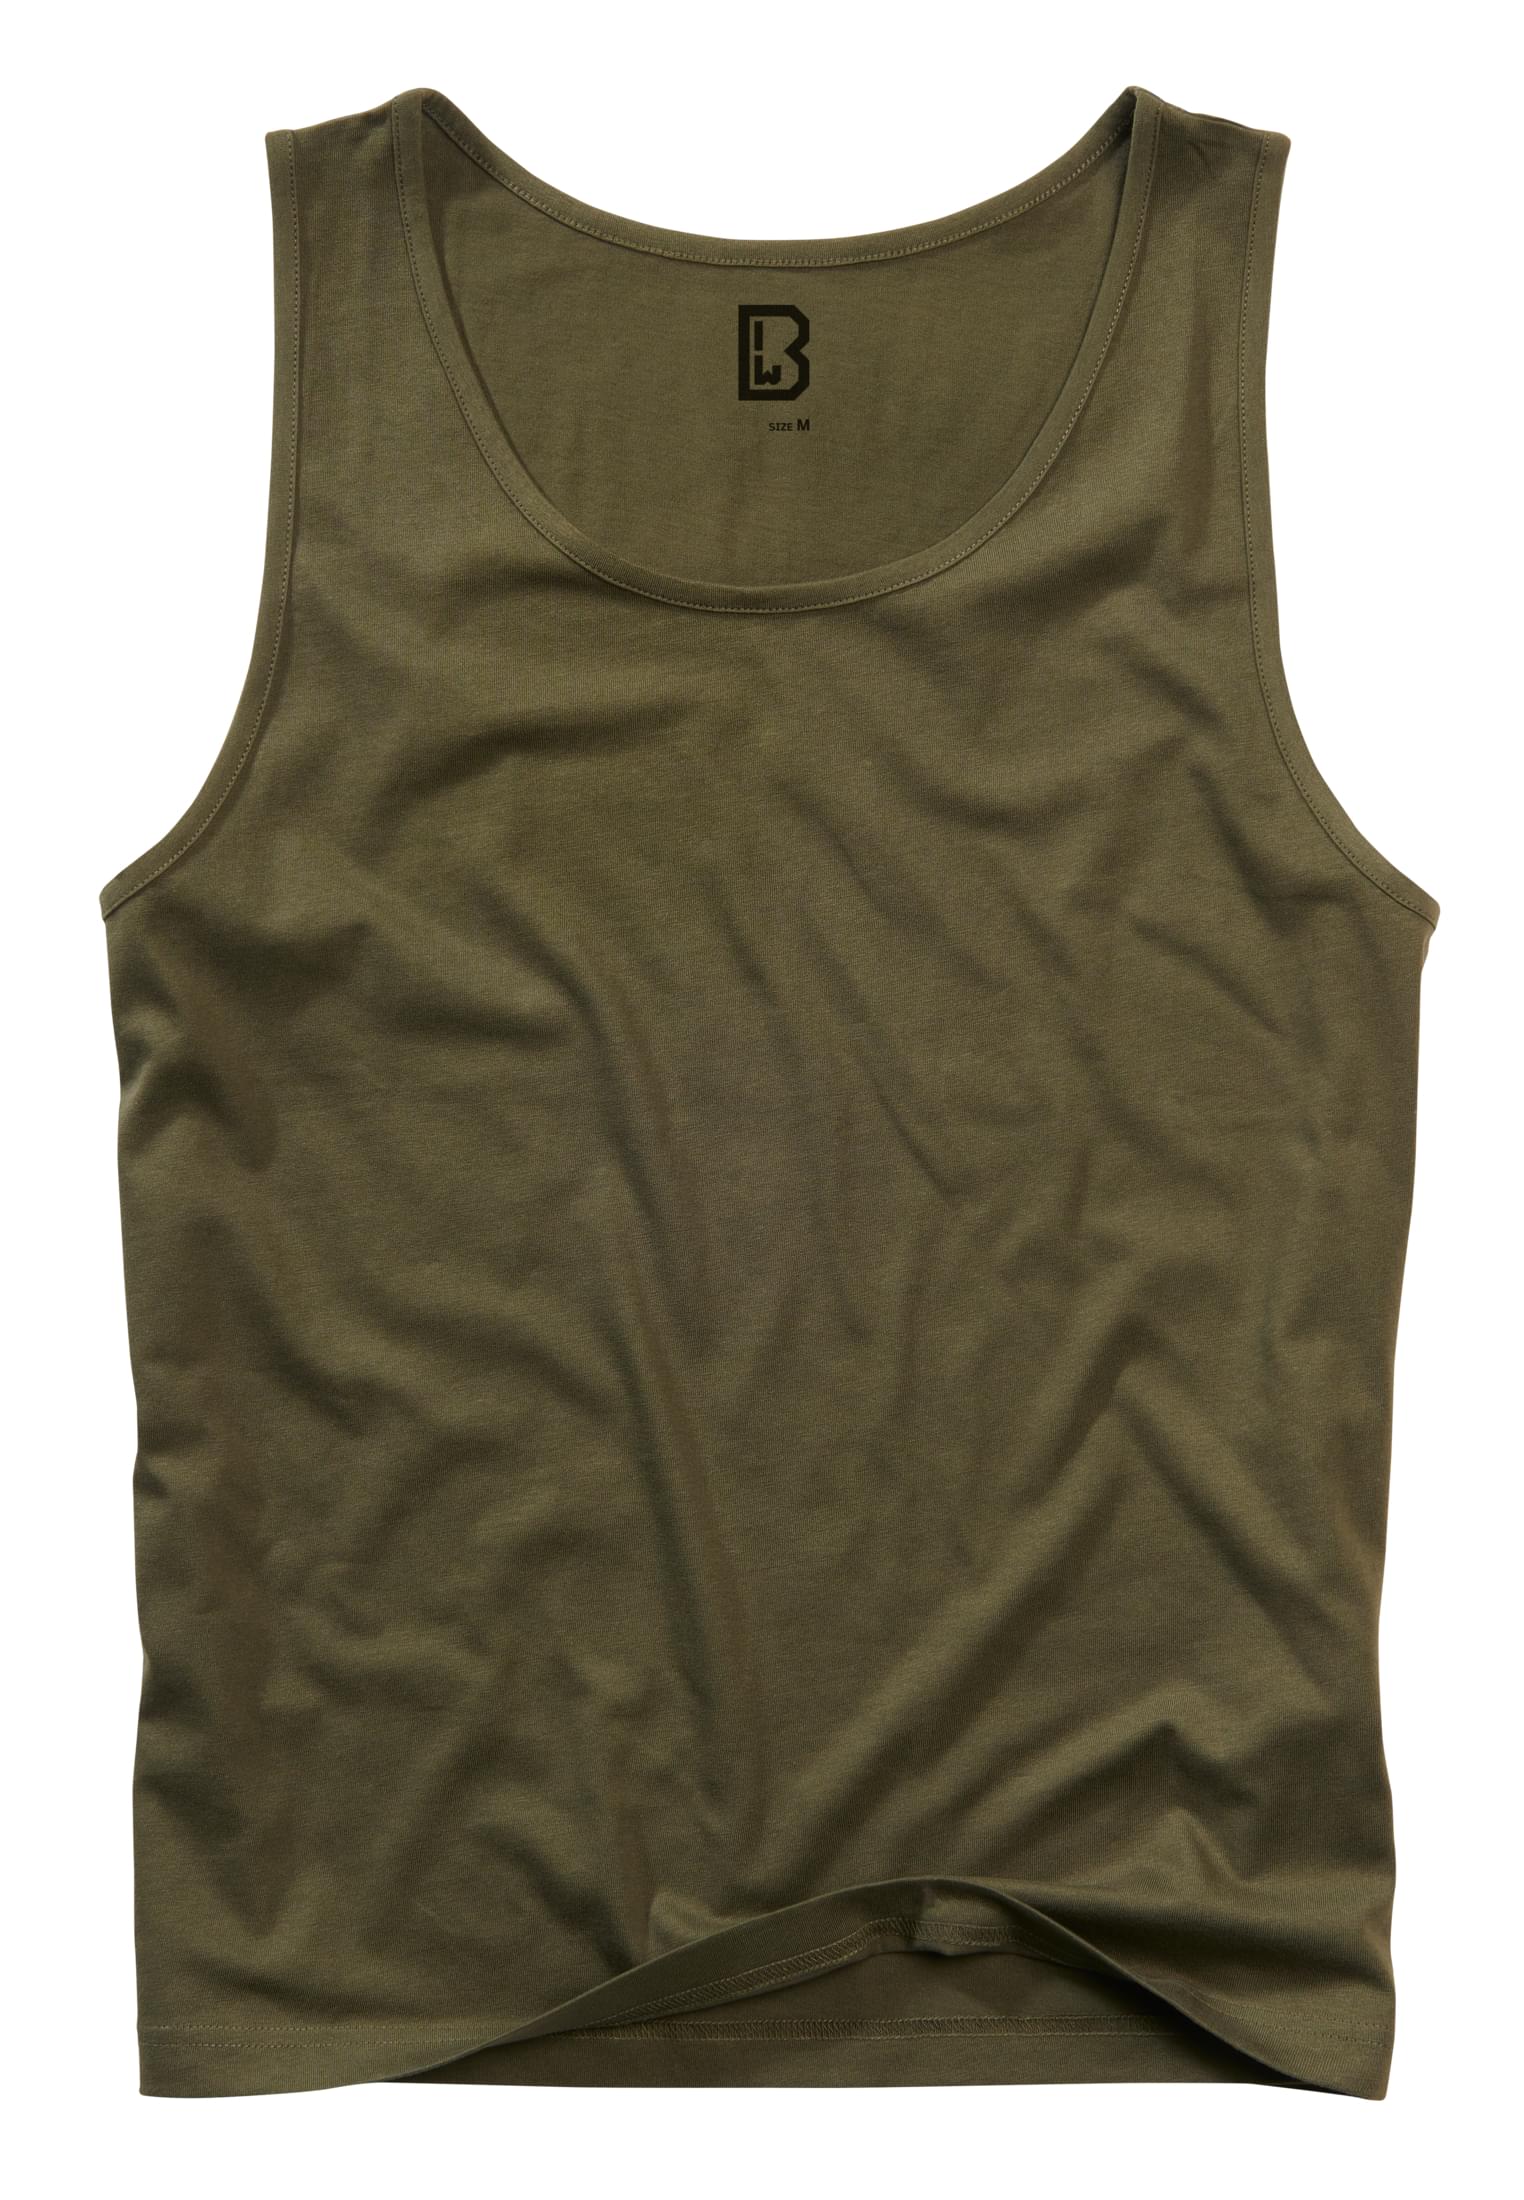 Olive tank top